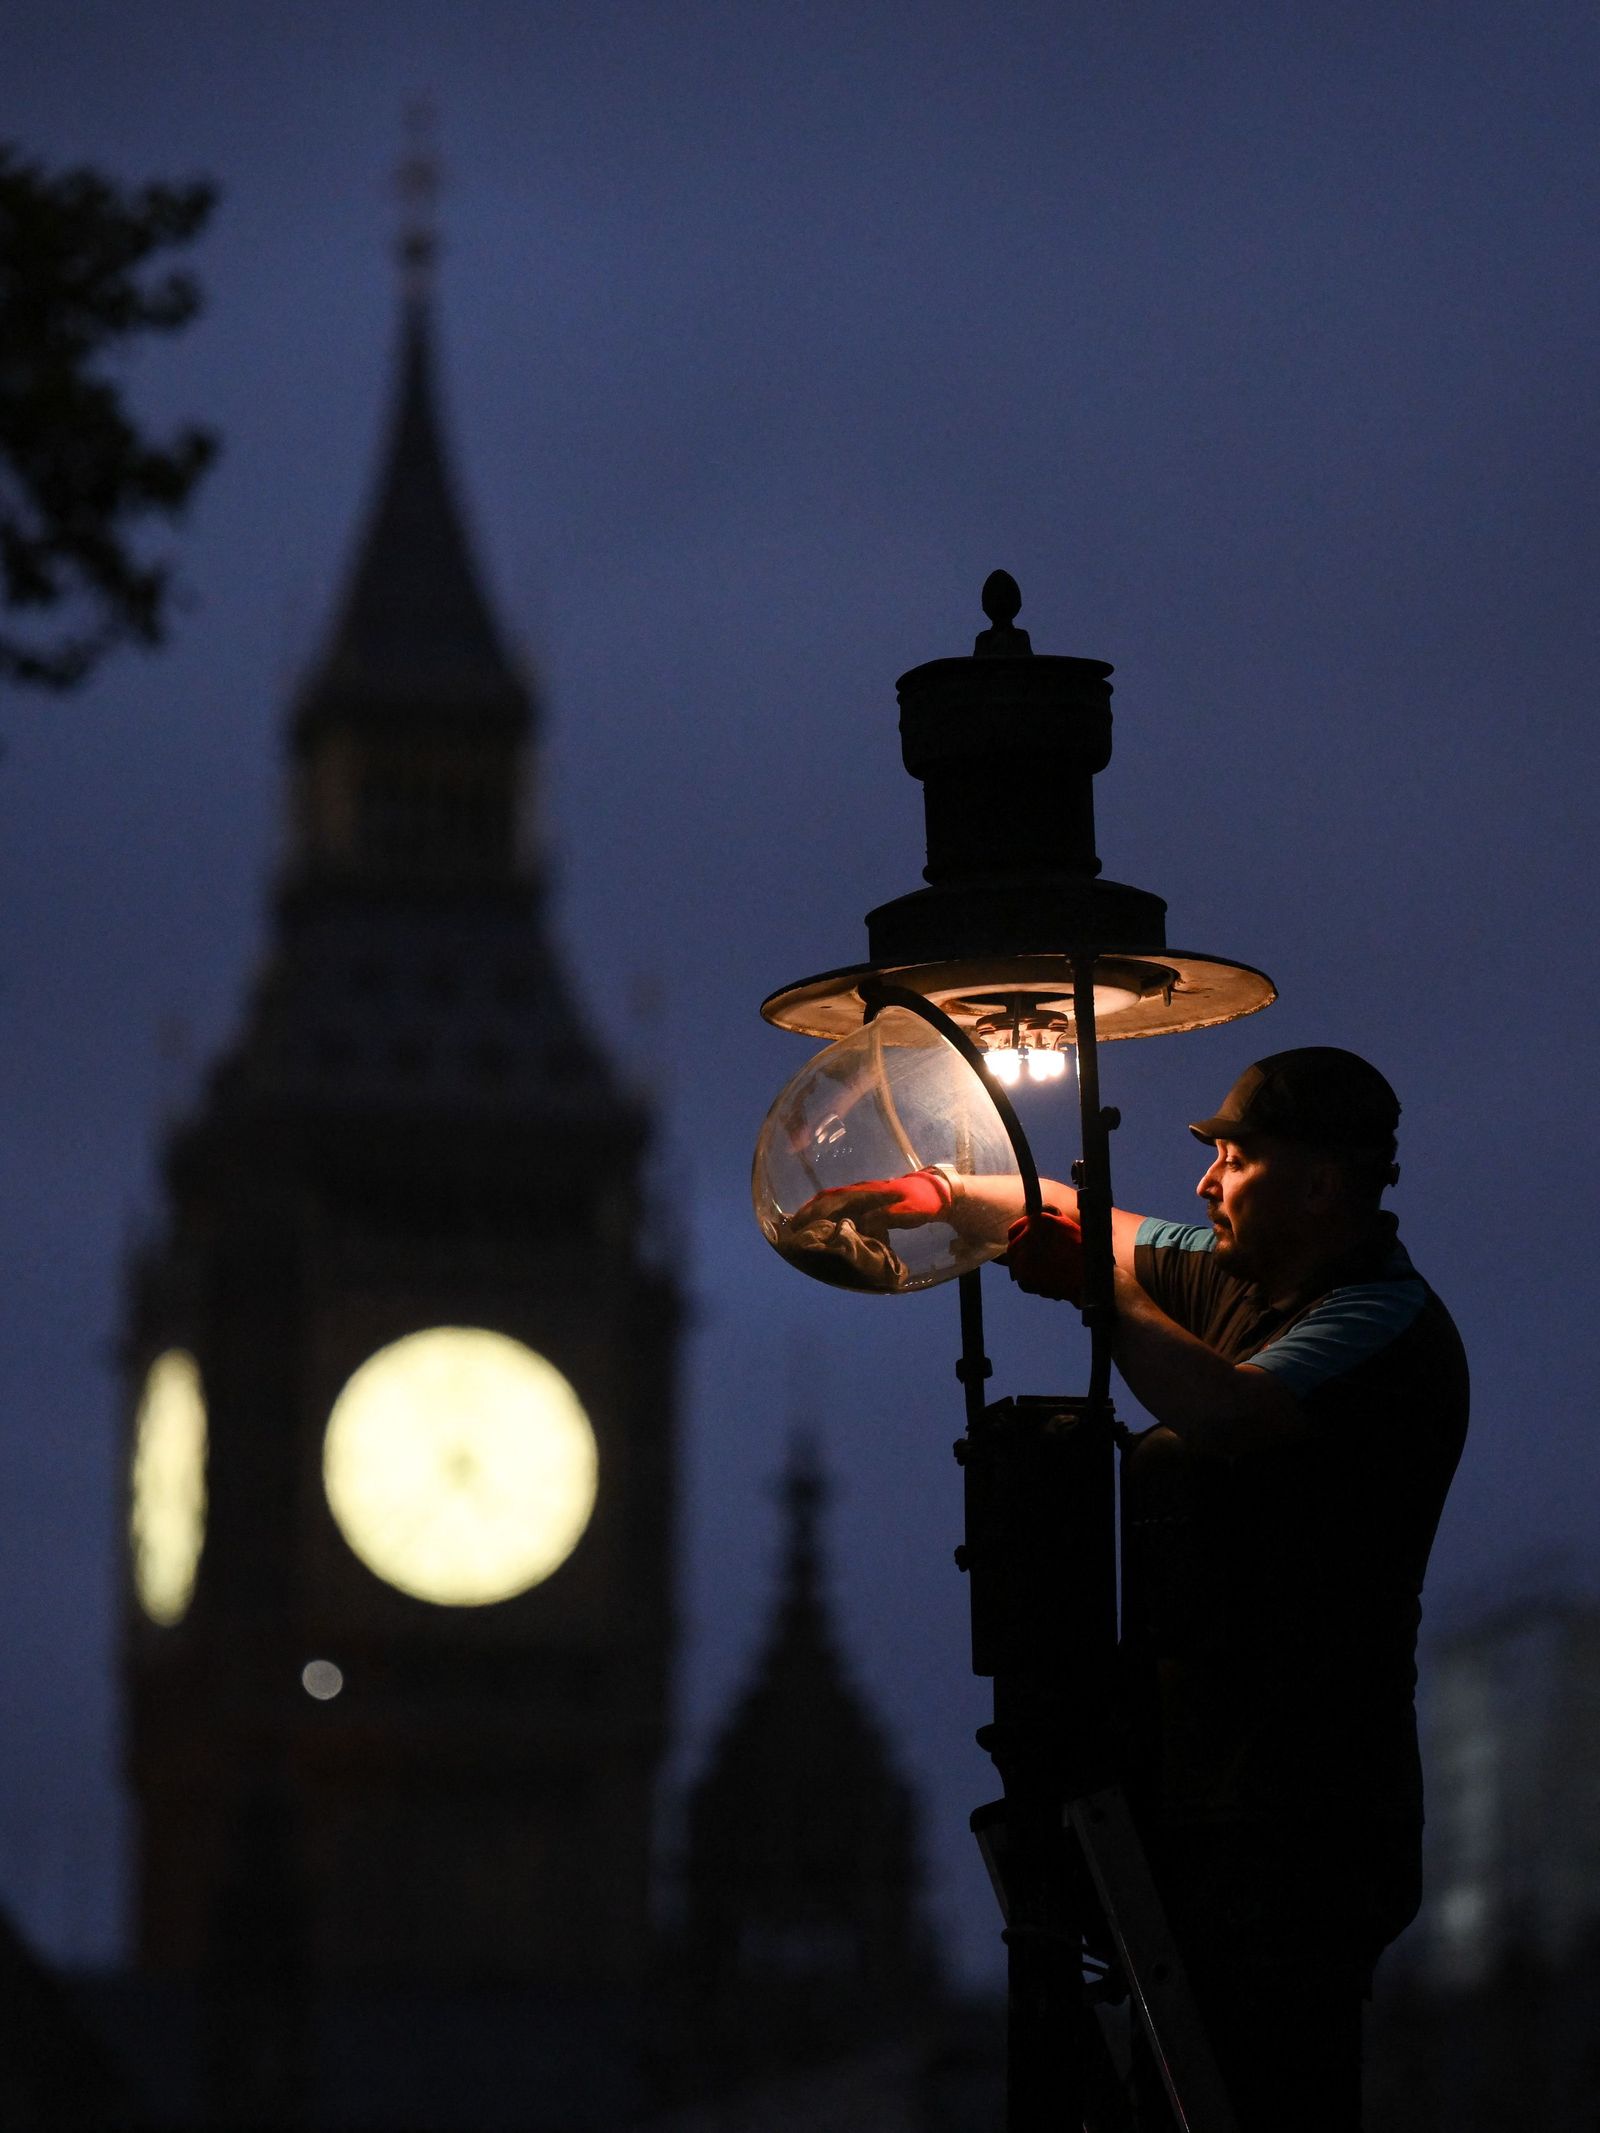 A British Gas engineer services a gas-powered lamp near the Houses of Parliament in central london on November 11, 2022. - Intrigued tourists watch as Paul Doy climbs a ladder outside London's Westminster Abbey and lifts the globe of a gas street lamp. Winding its timer, he then ignites a small cloth mesh, creating a distinctive soft warm light that illuminates the darkness. 